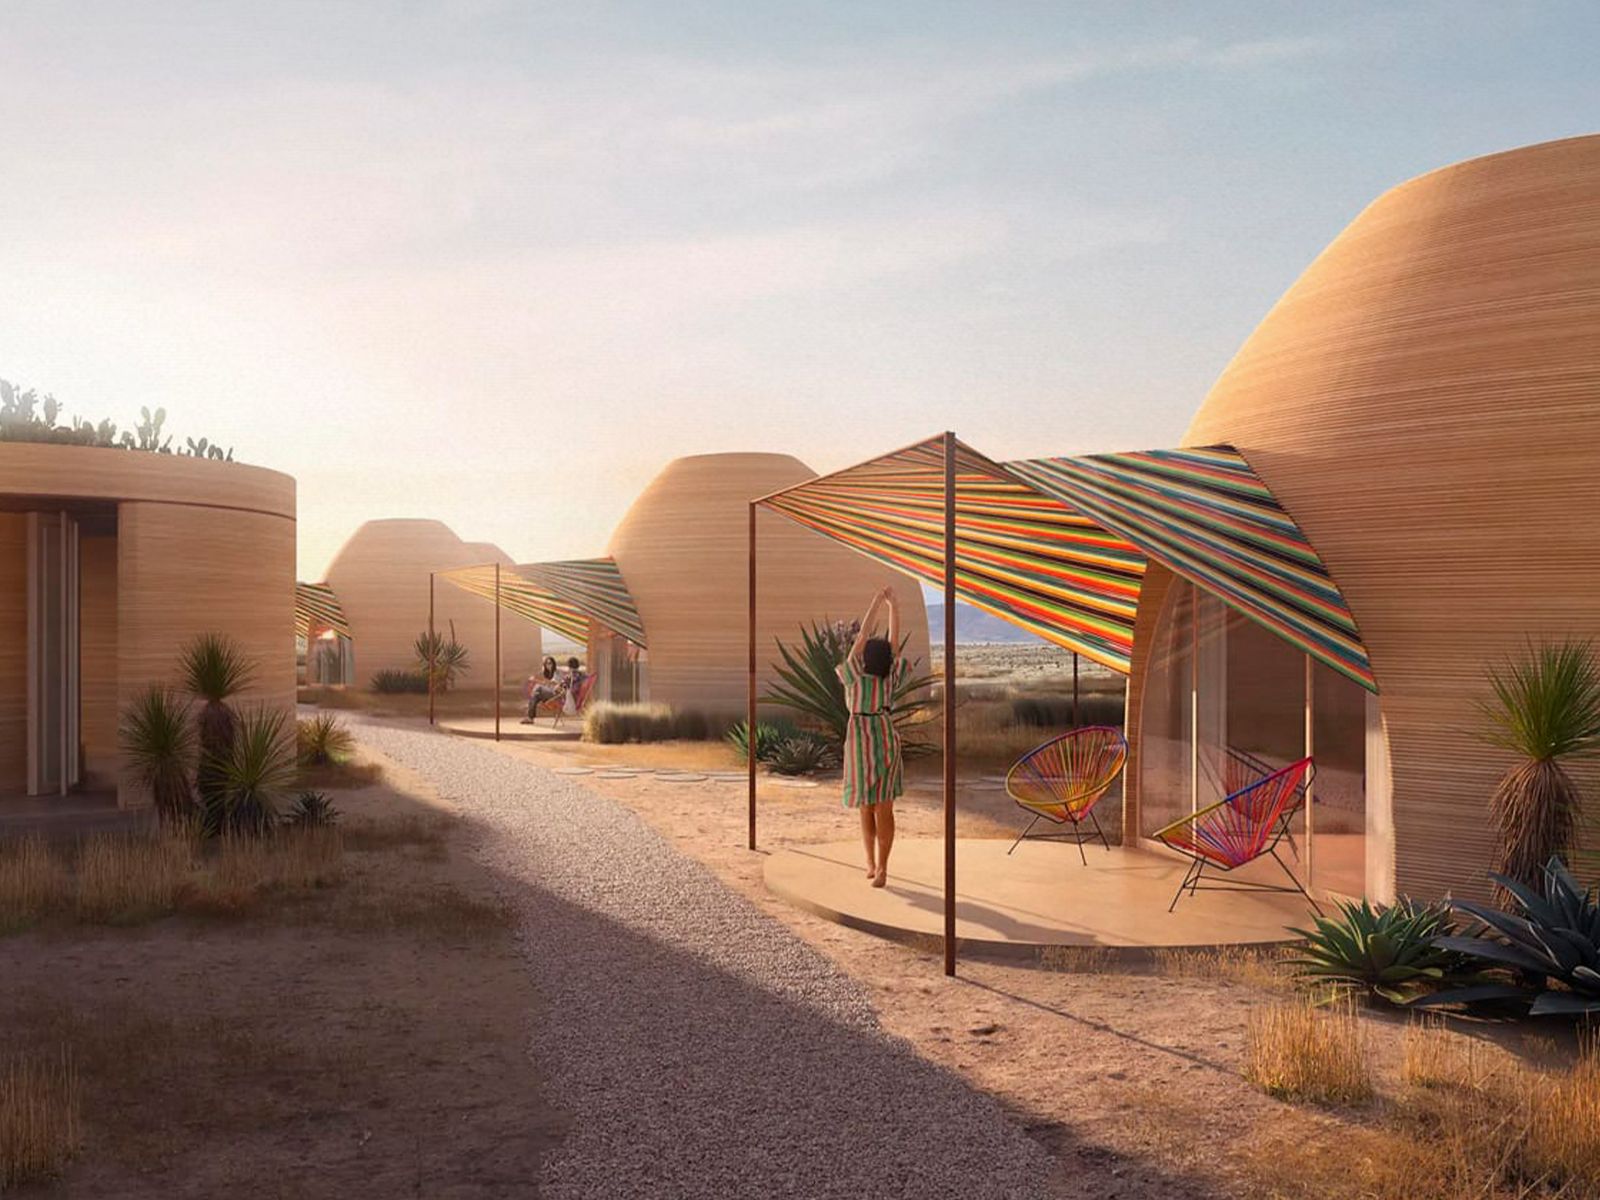 This is the world’s first 3D printed hotel